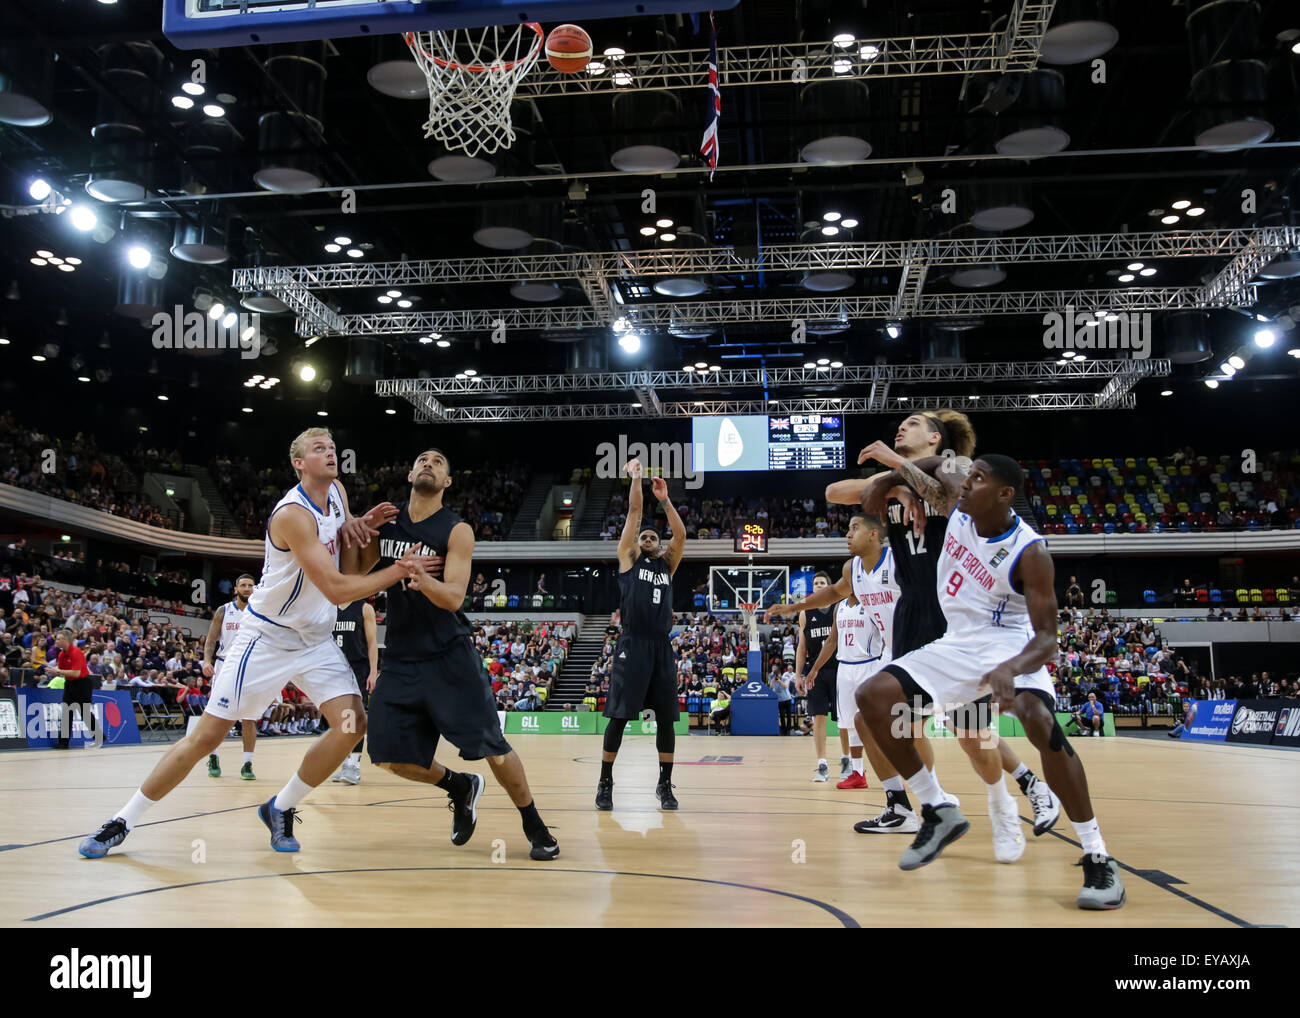 Olympic Park, London, UK. 25th July, 2015. Basketball. GB senior men lose 63 - 84 to NewZealand Tall Blacks at Copper Box, Olympic Park, London, UK July 25, 2015. GB Captain Drew Sullivan becomes first GB men's player to win 100 caps. Credit:  carol moir/Alamy Live News Stock Photo